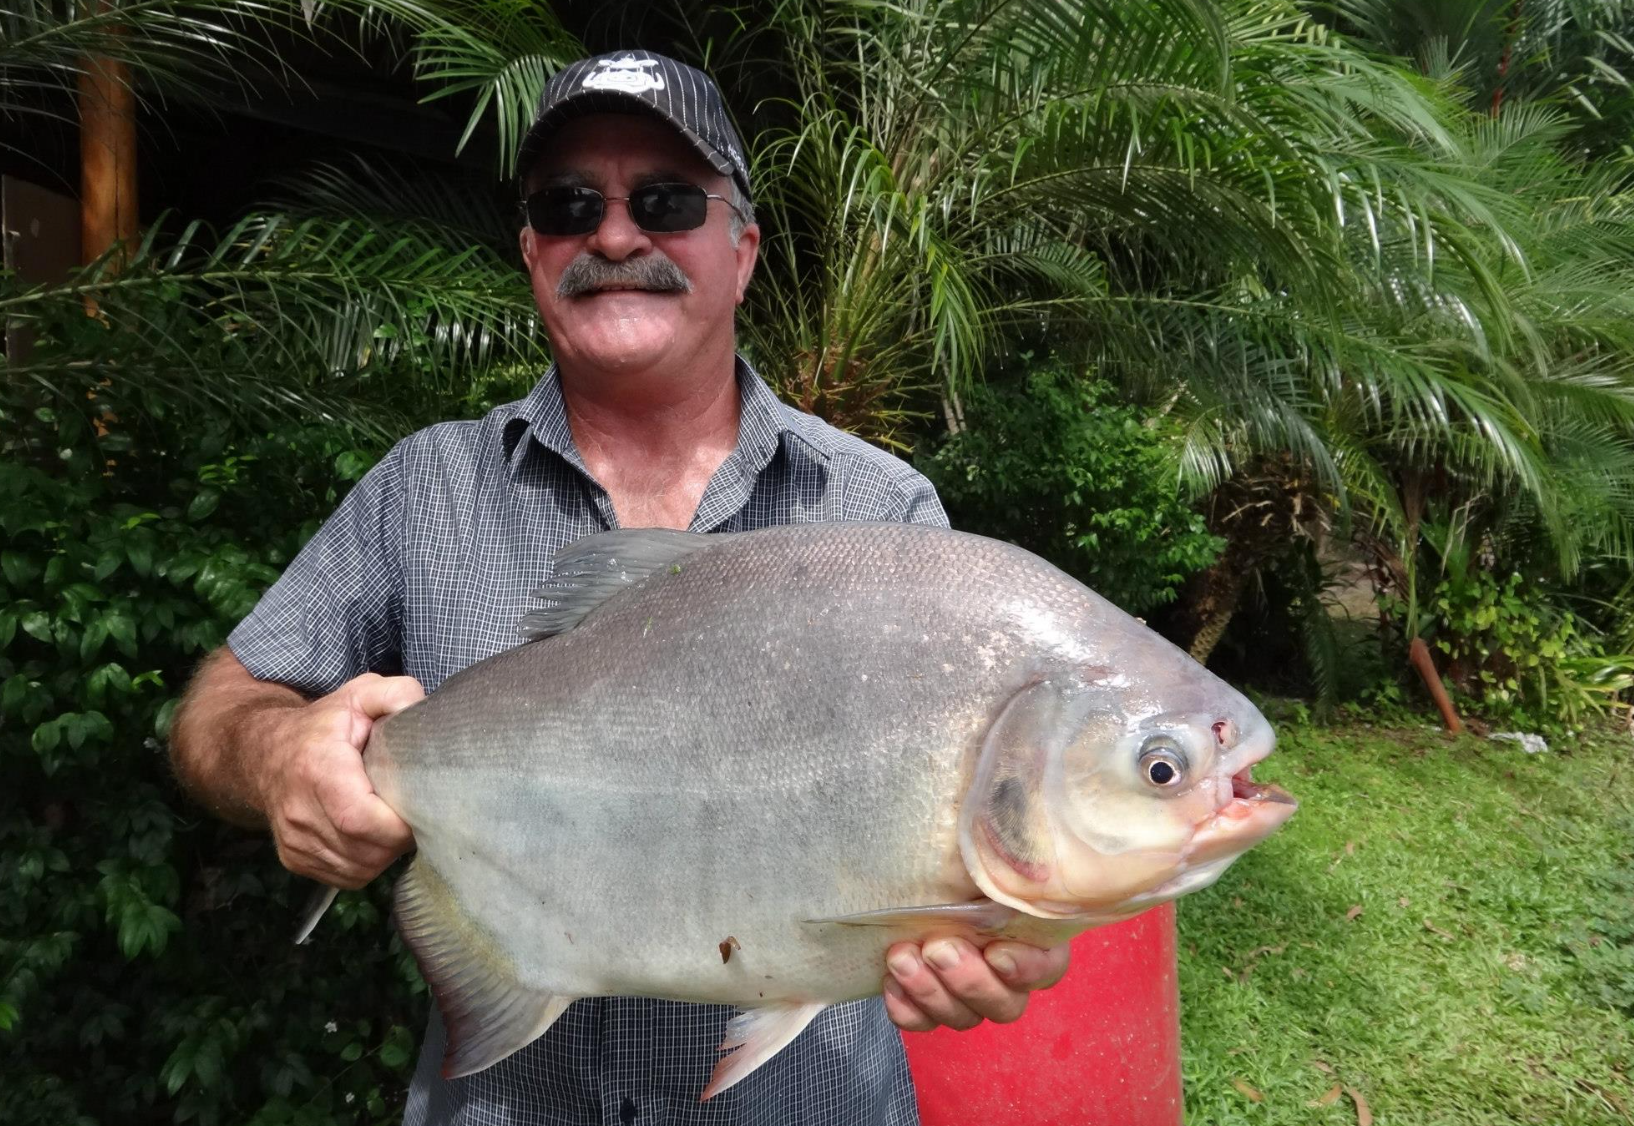 Kevin Darmody, 65, was last seen on the banks of a river in a national park in Queensland